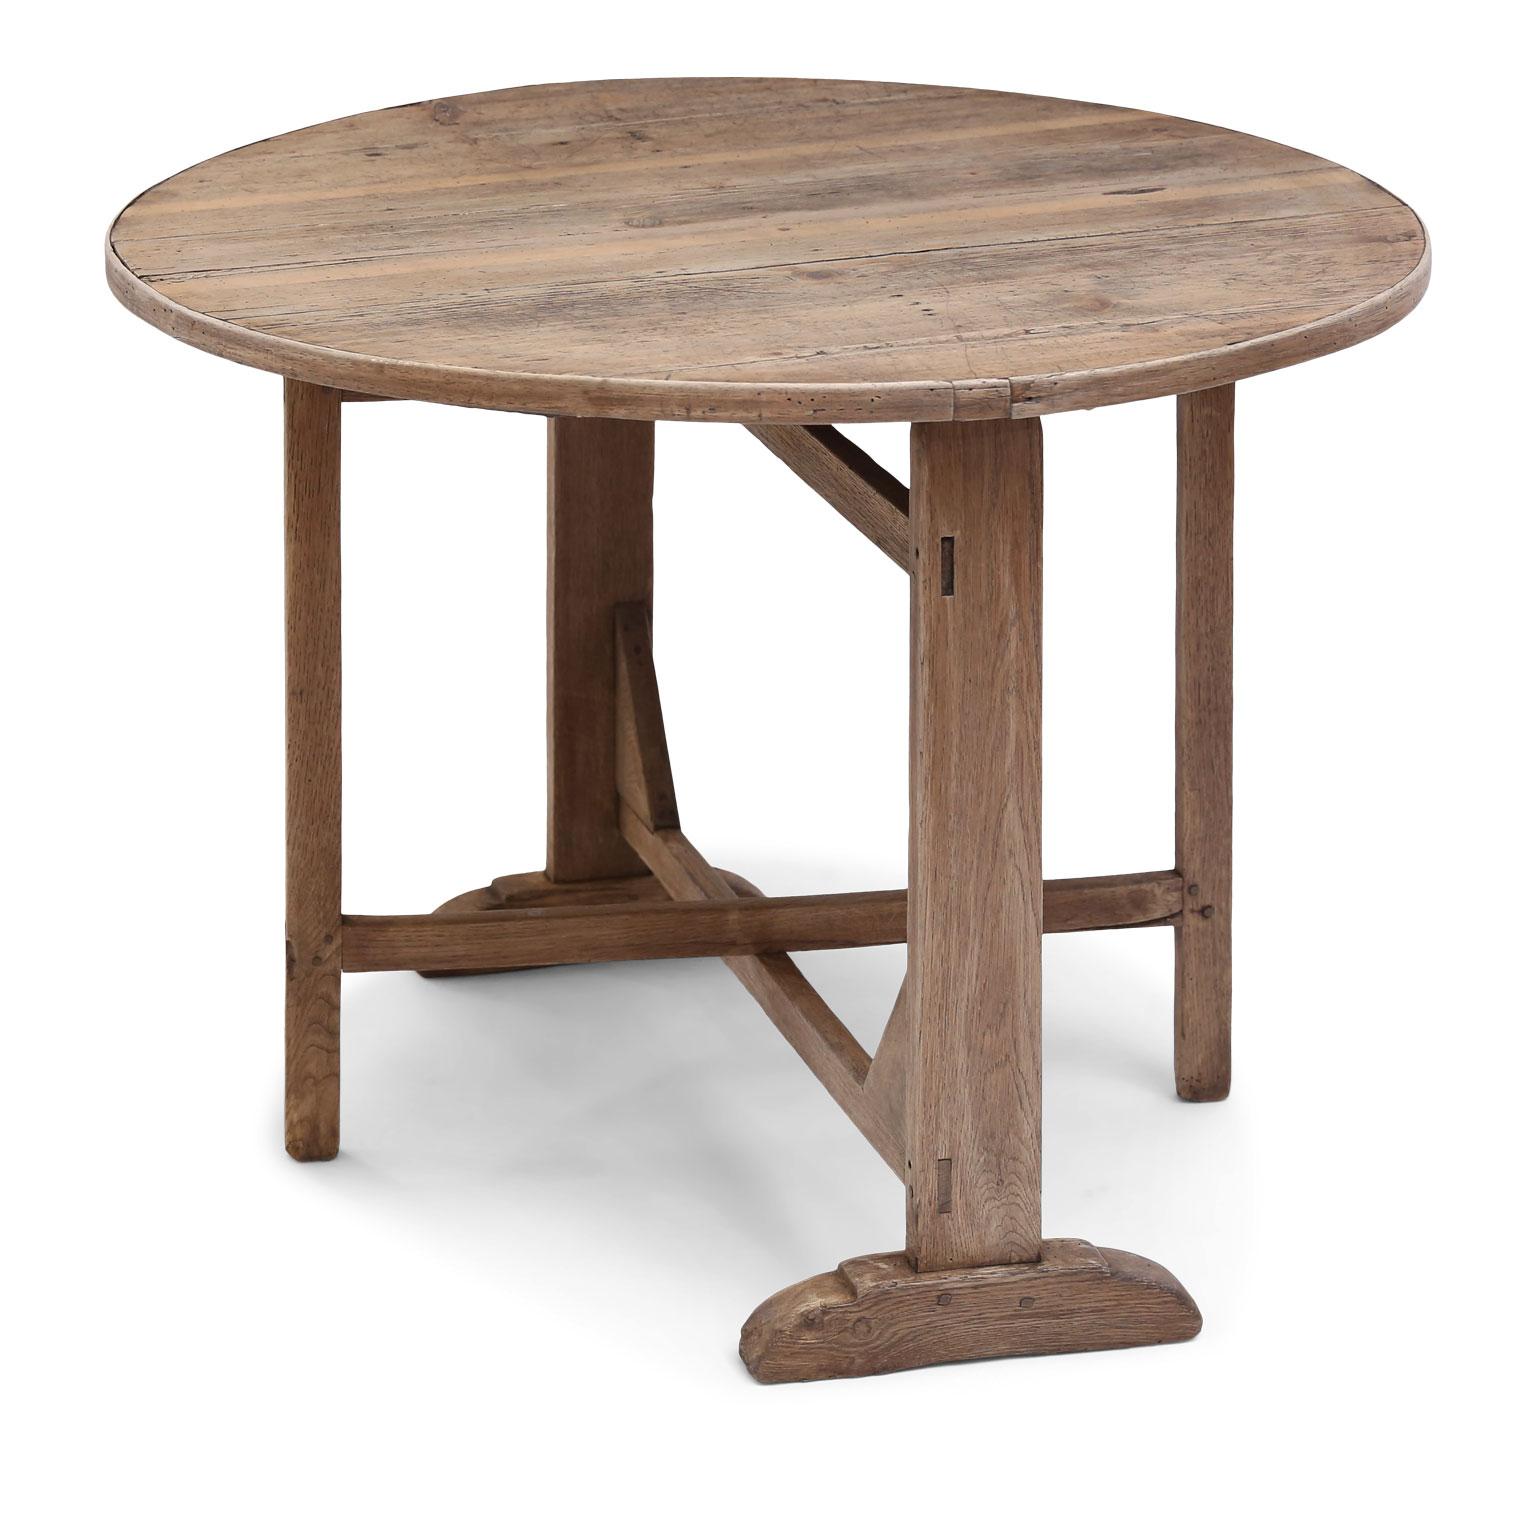 French semi-bleached brown table de vendange (wine tasting table) in oak and pine dating to the late 19th century. Stabile, sturdy mortise and Tenon construction. Pine top surrounded by bentwood edge upon a hand carved oak base. Tilt-top fully